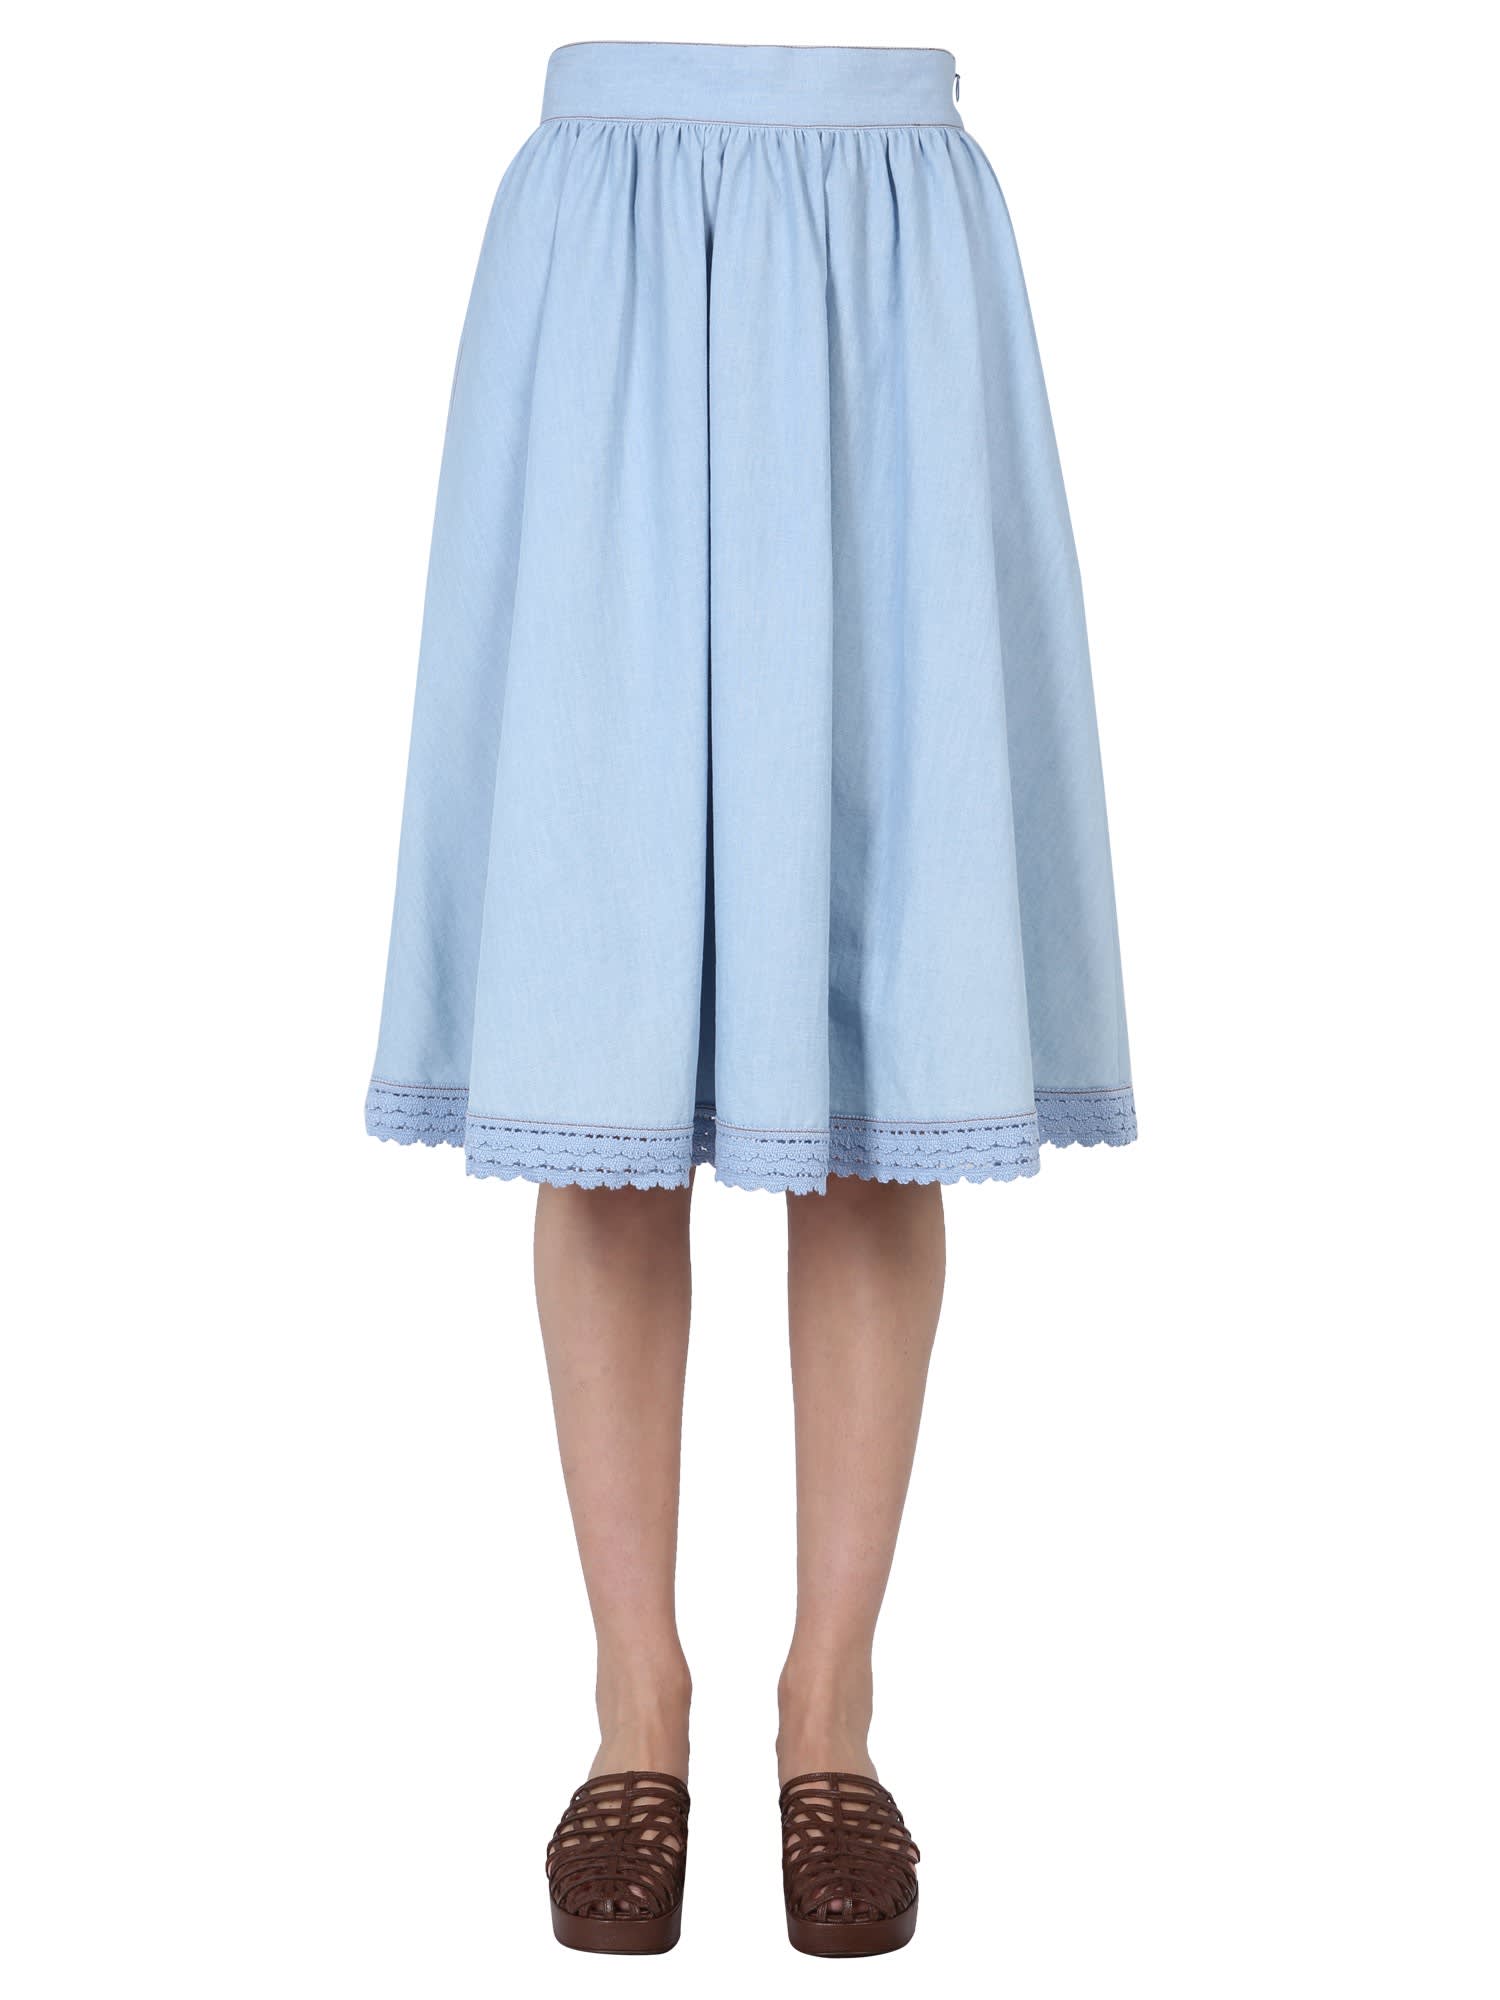 Boutique Moschino Chambray Skirt